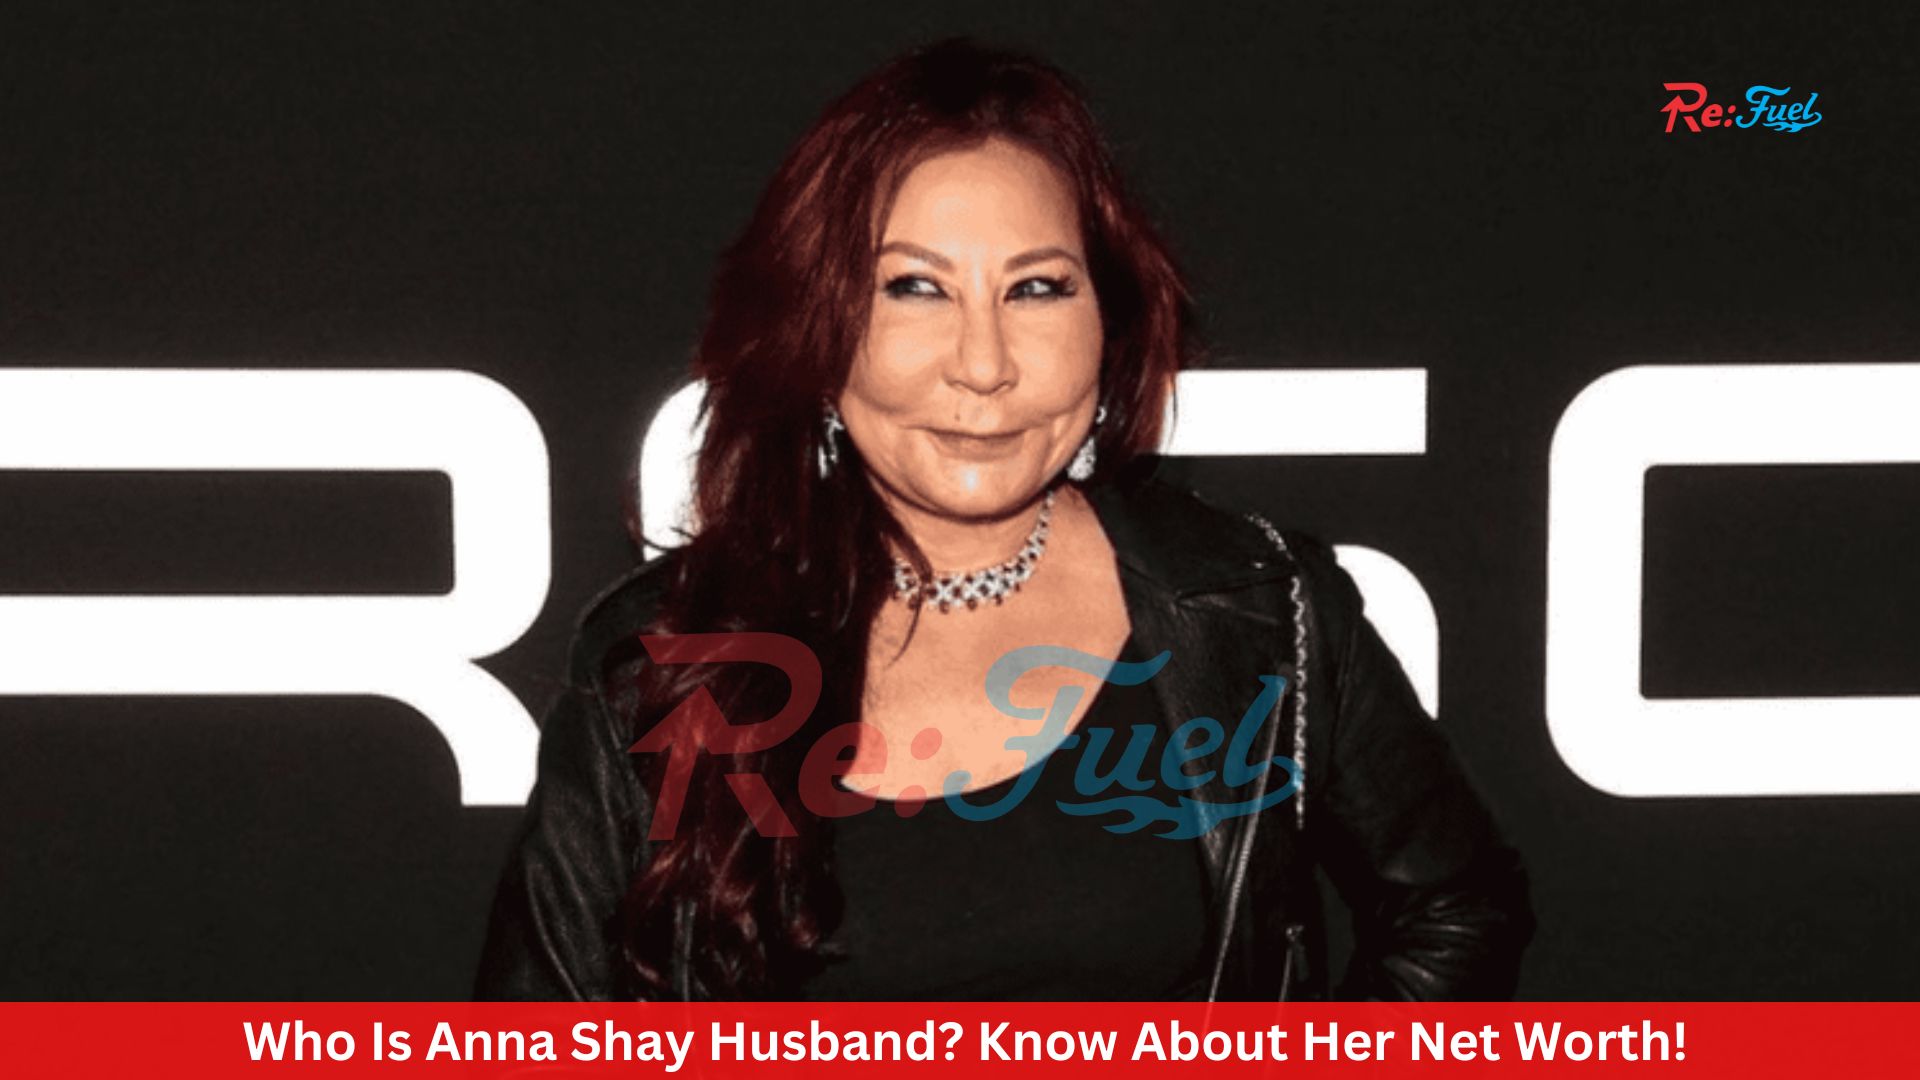 Who Is Anna Shay Husband? Know About Her Net Worth!